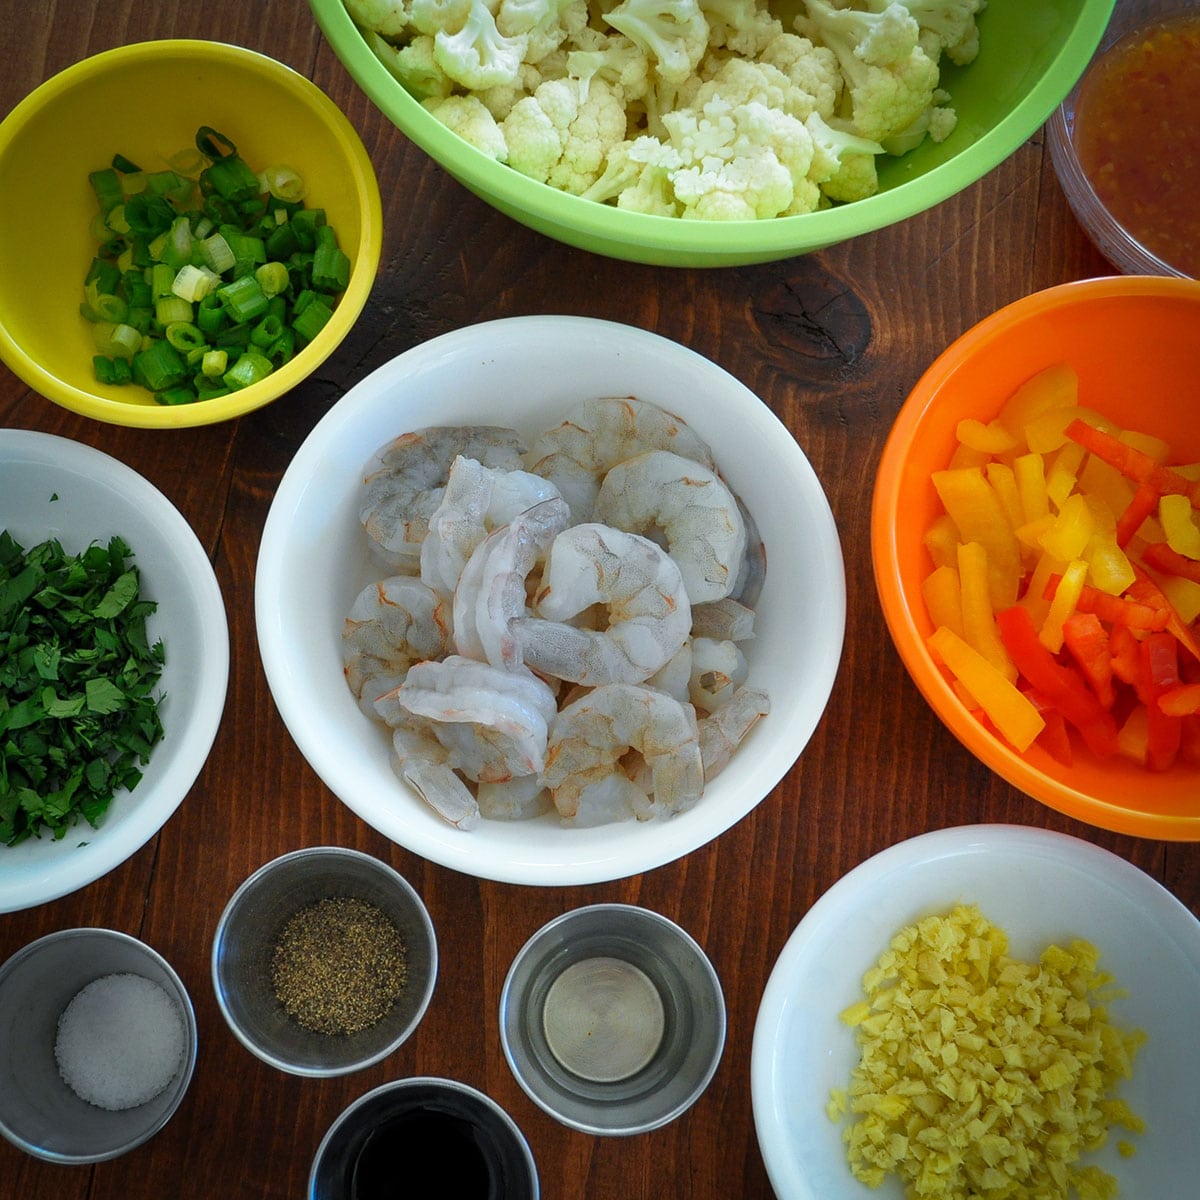 Bowls with ingredients for shrimp and cauliflower stir fry